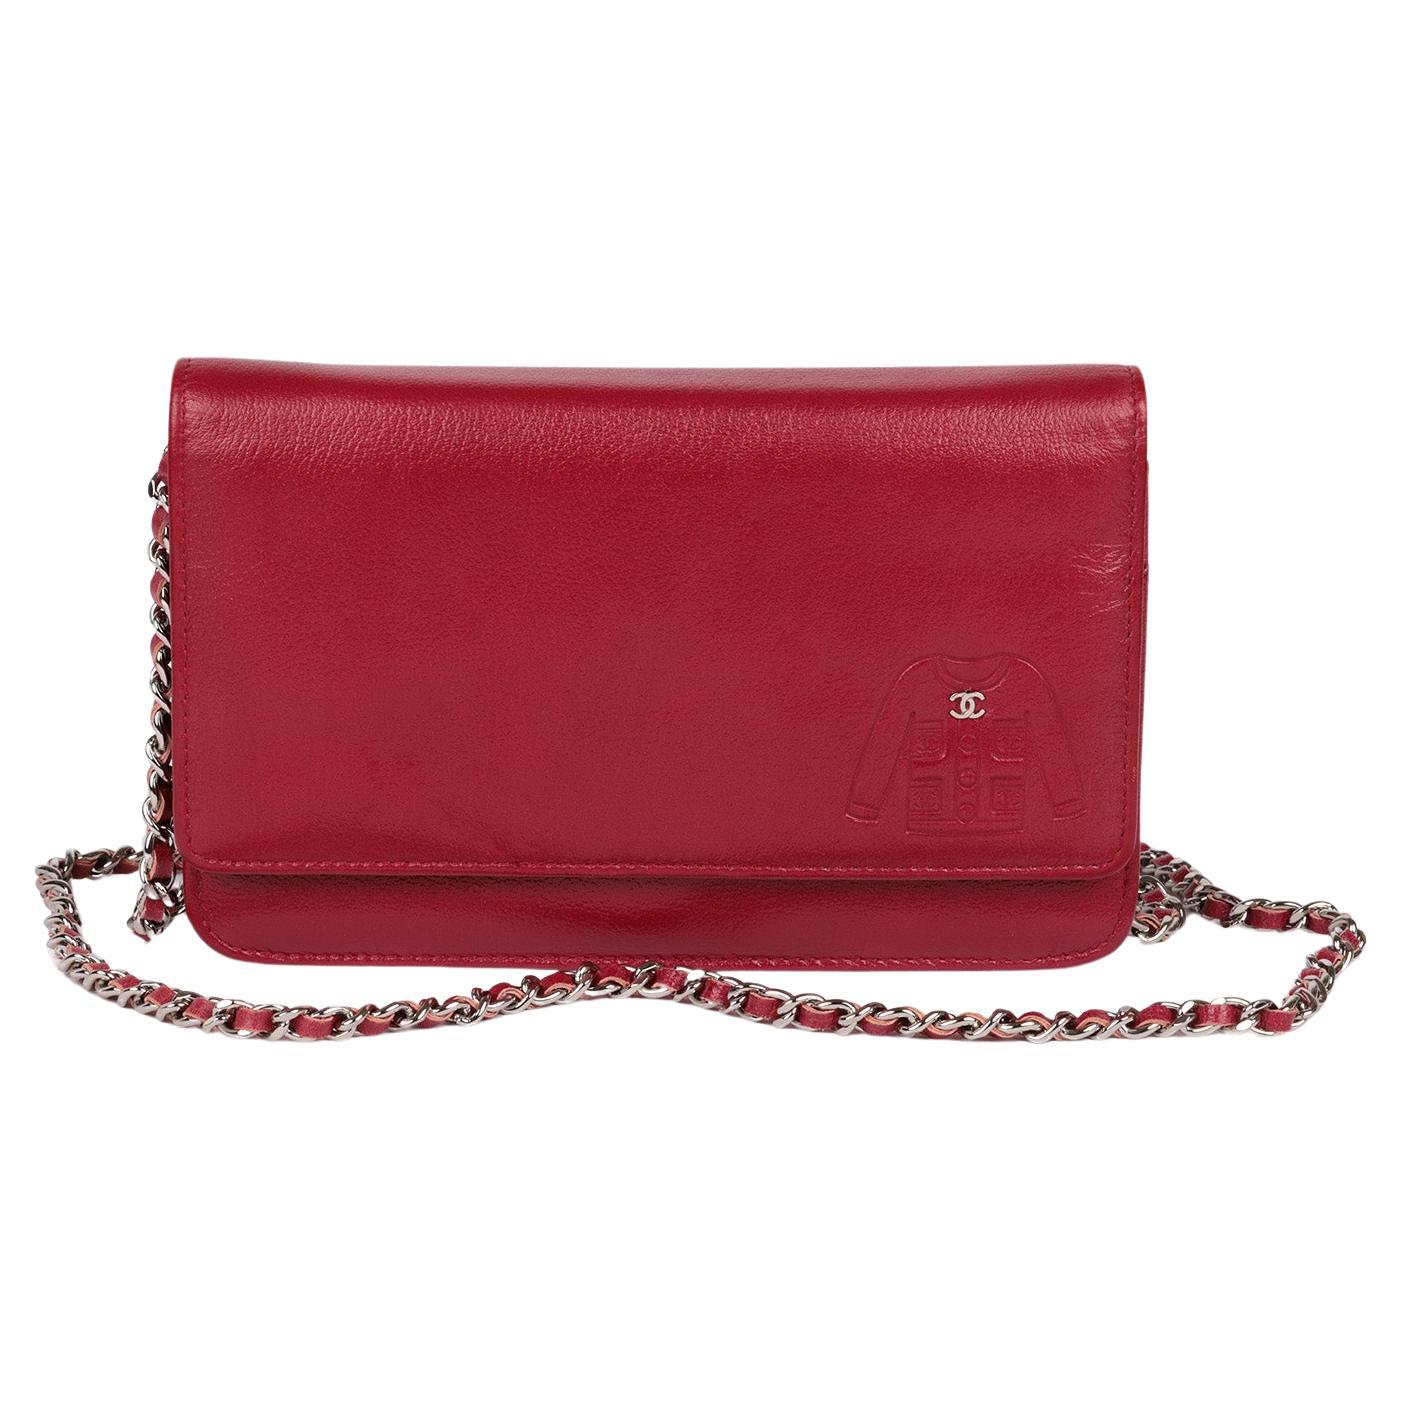 Chanel Red Goatskin Leather Mademoiselle Jacket Embossed Wallet-On-Chain WOC For Sale